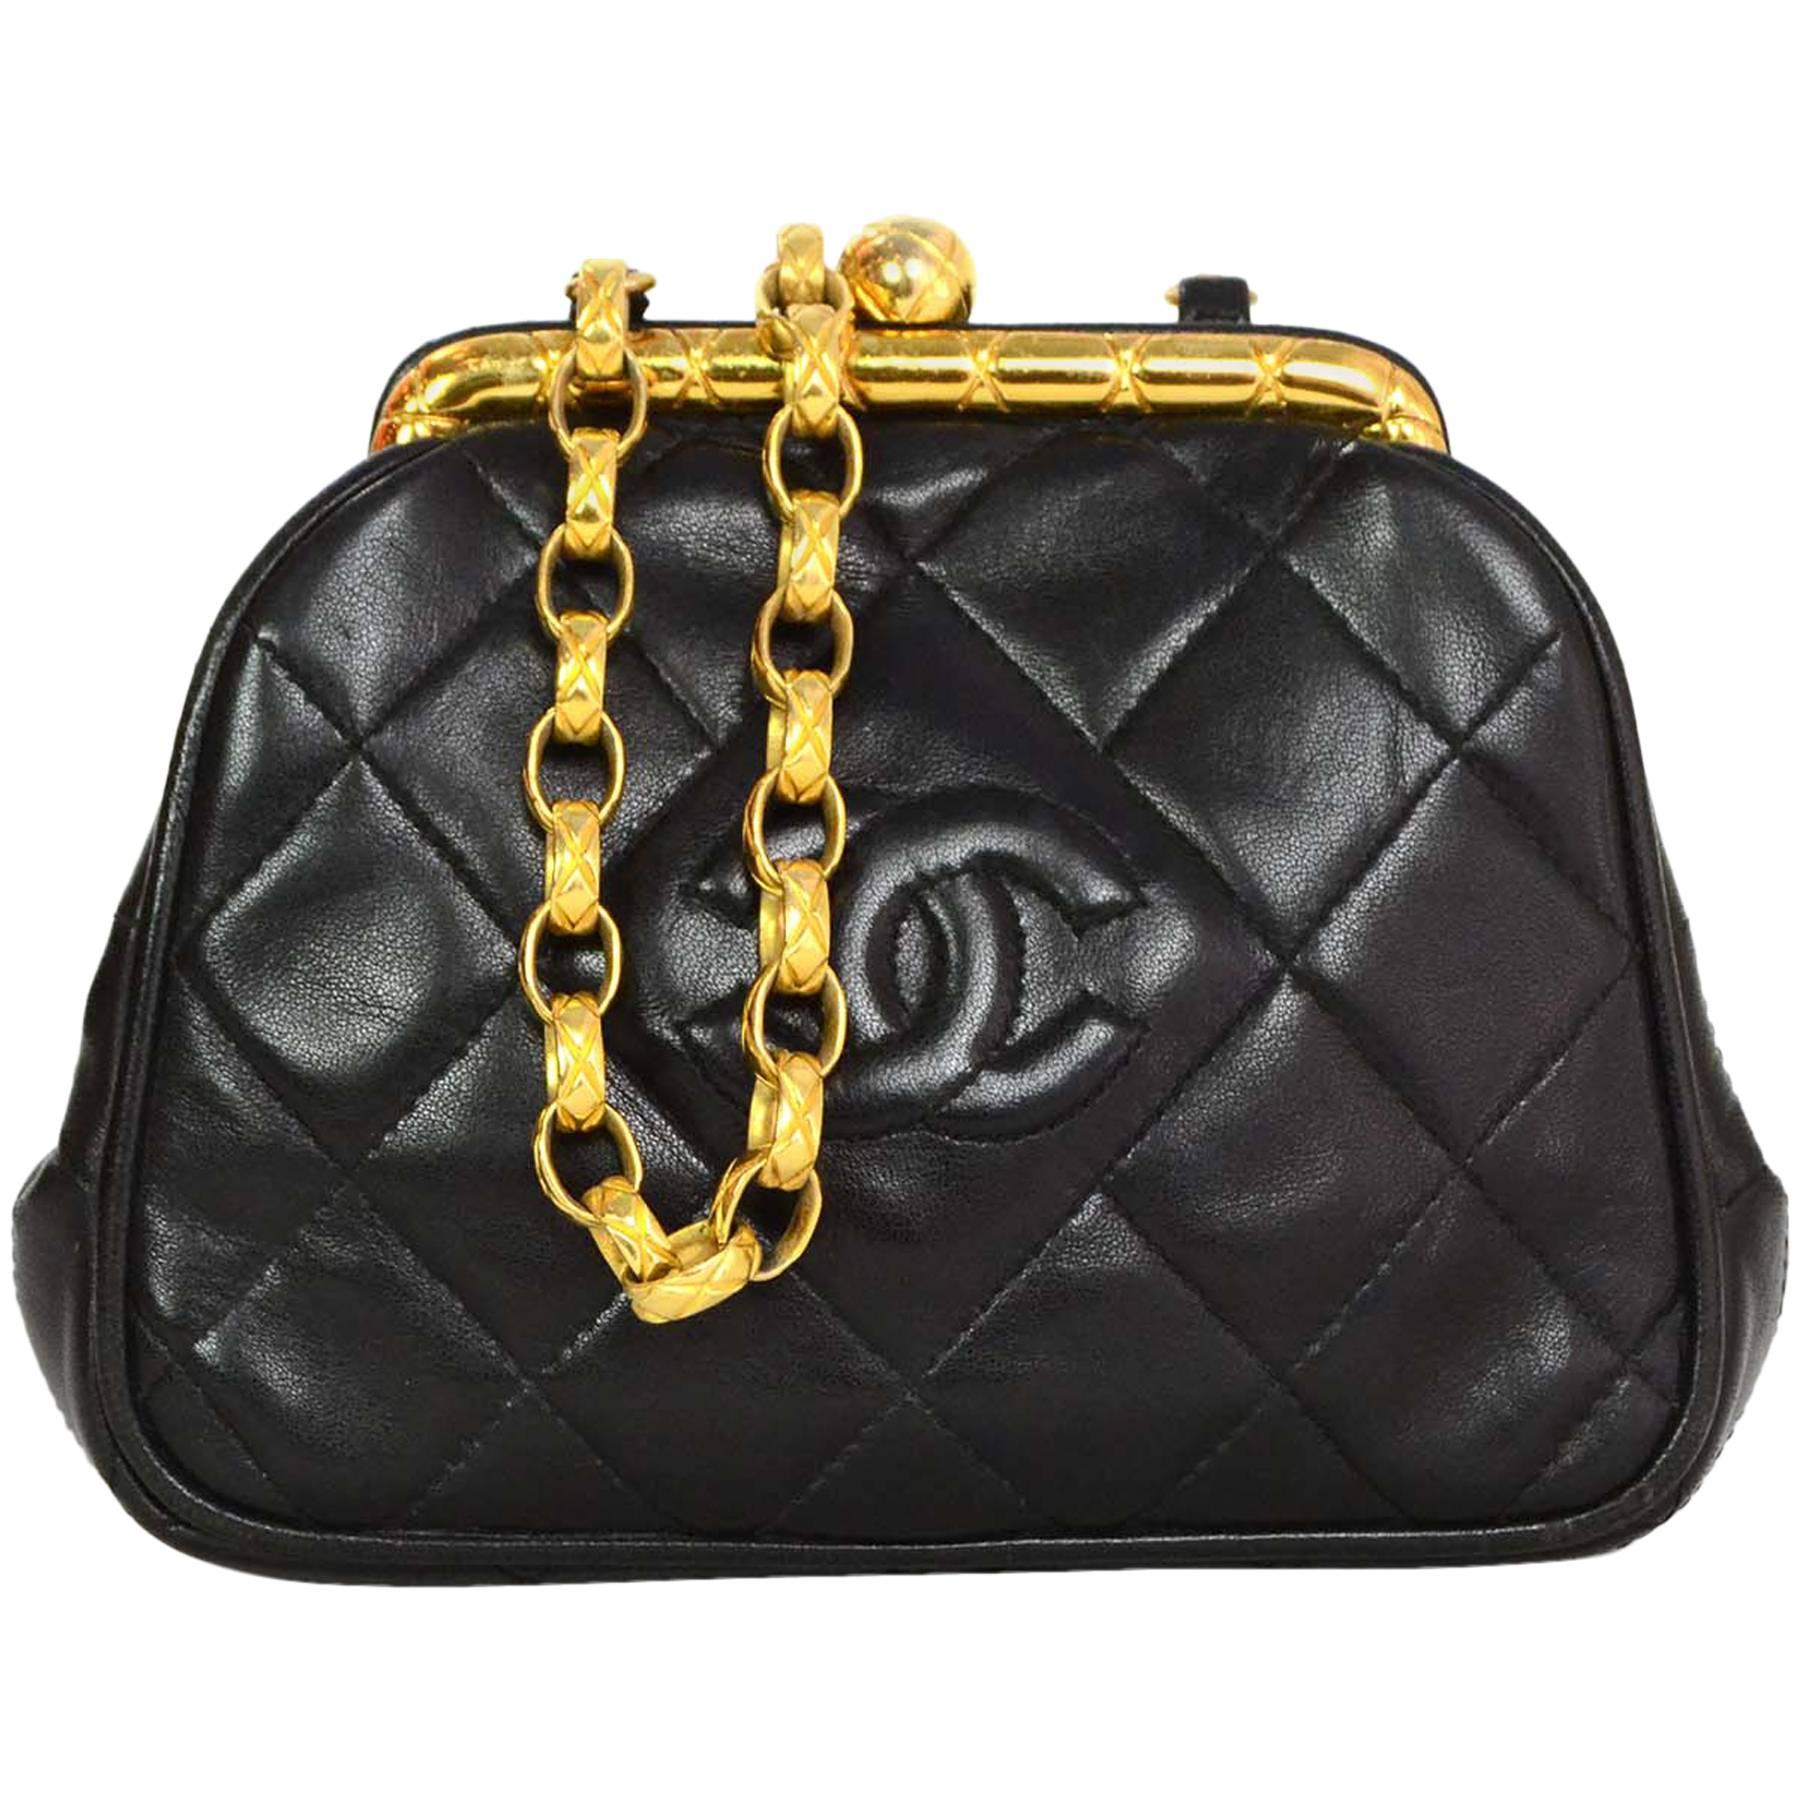 Chanel Vintage Black Quilted Leather Mini CC Cross-Body with GHW